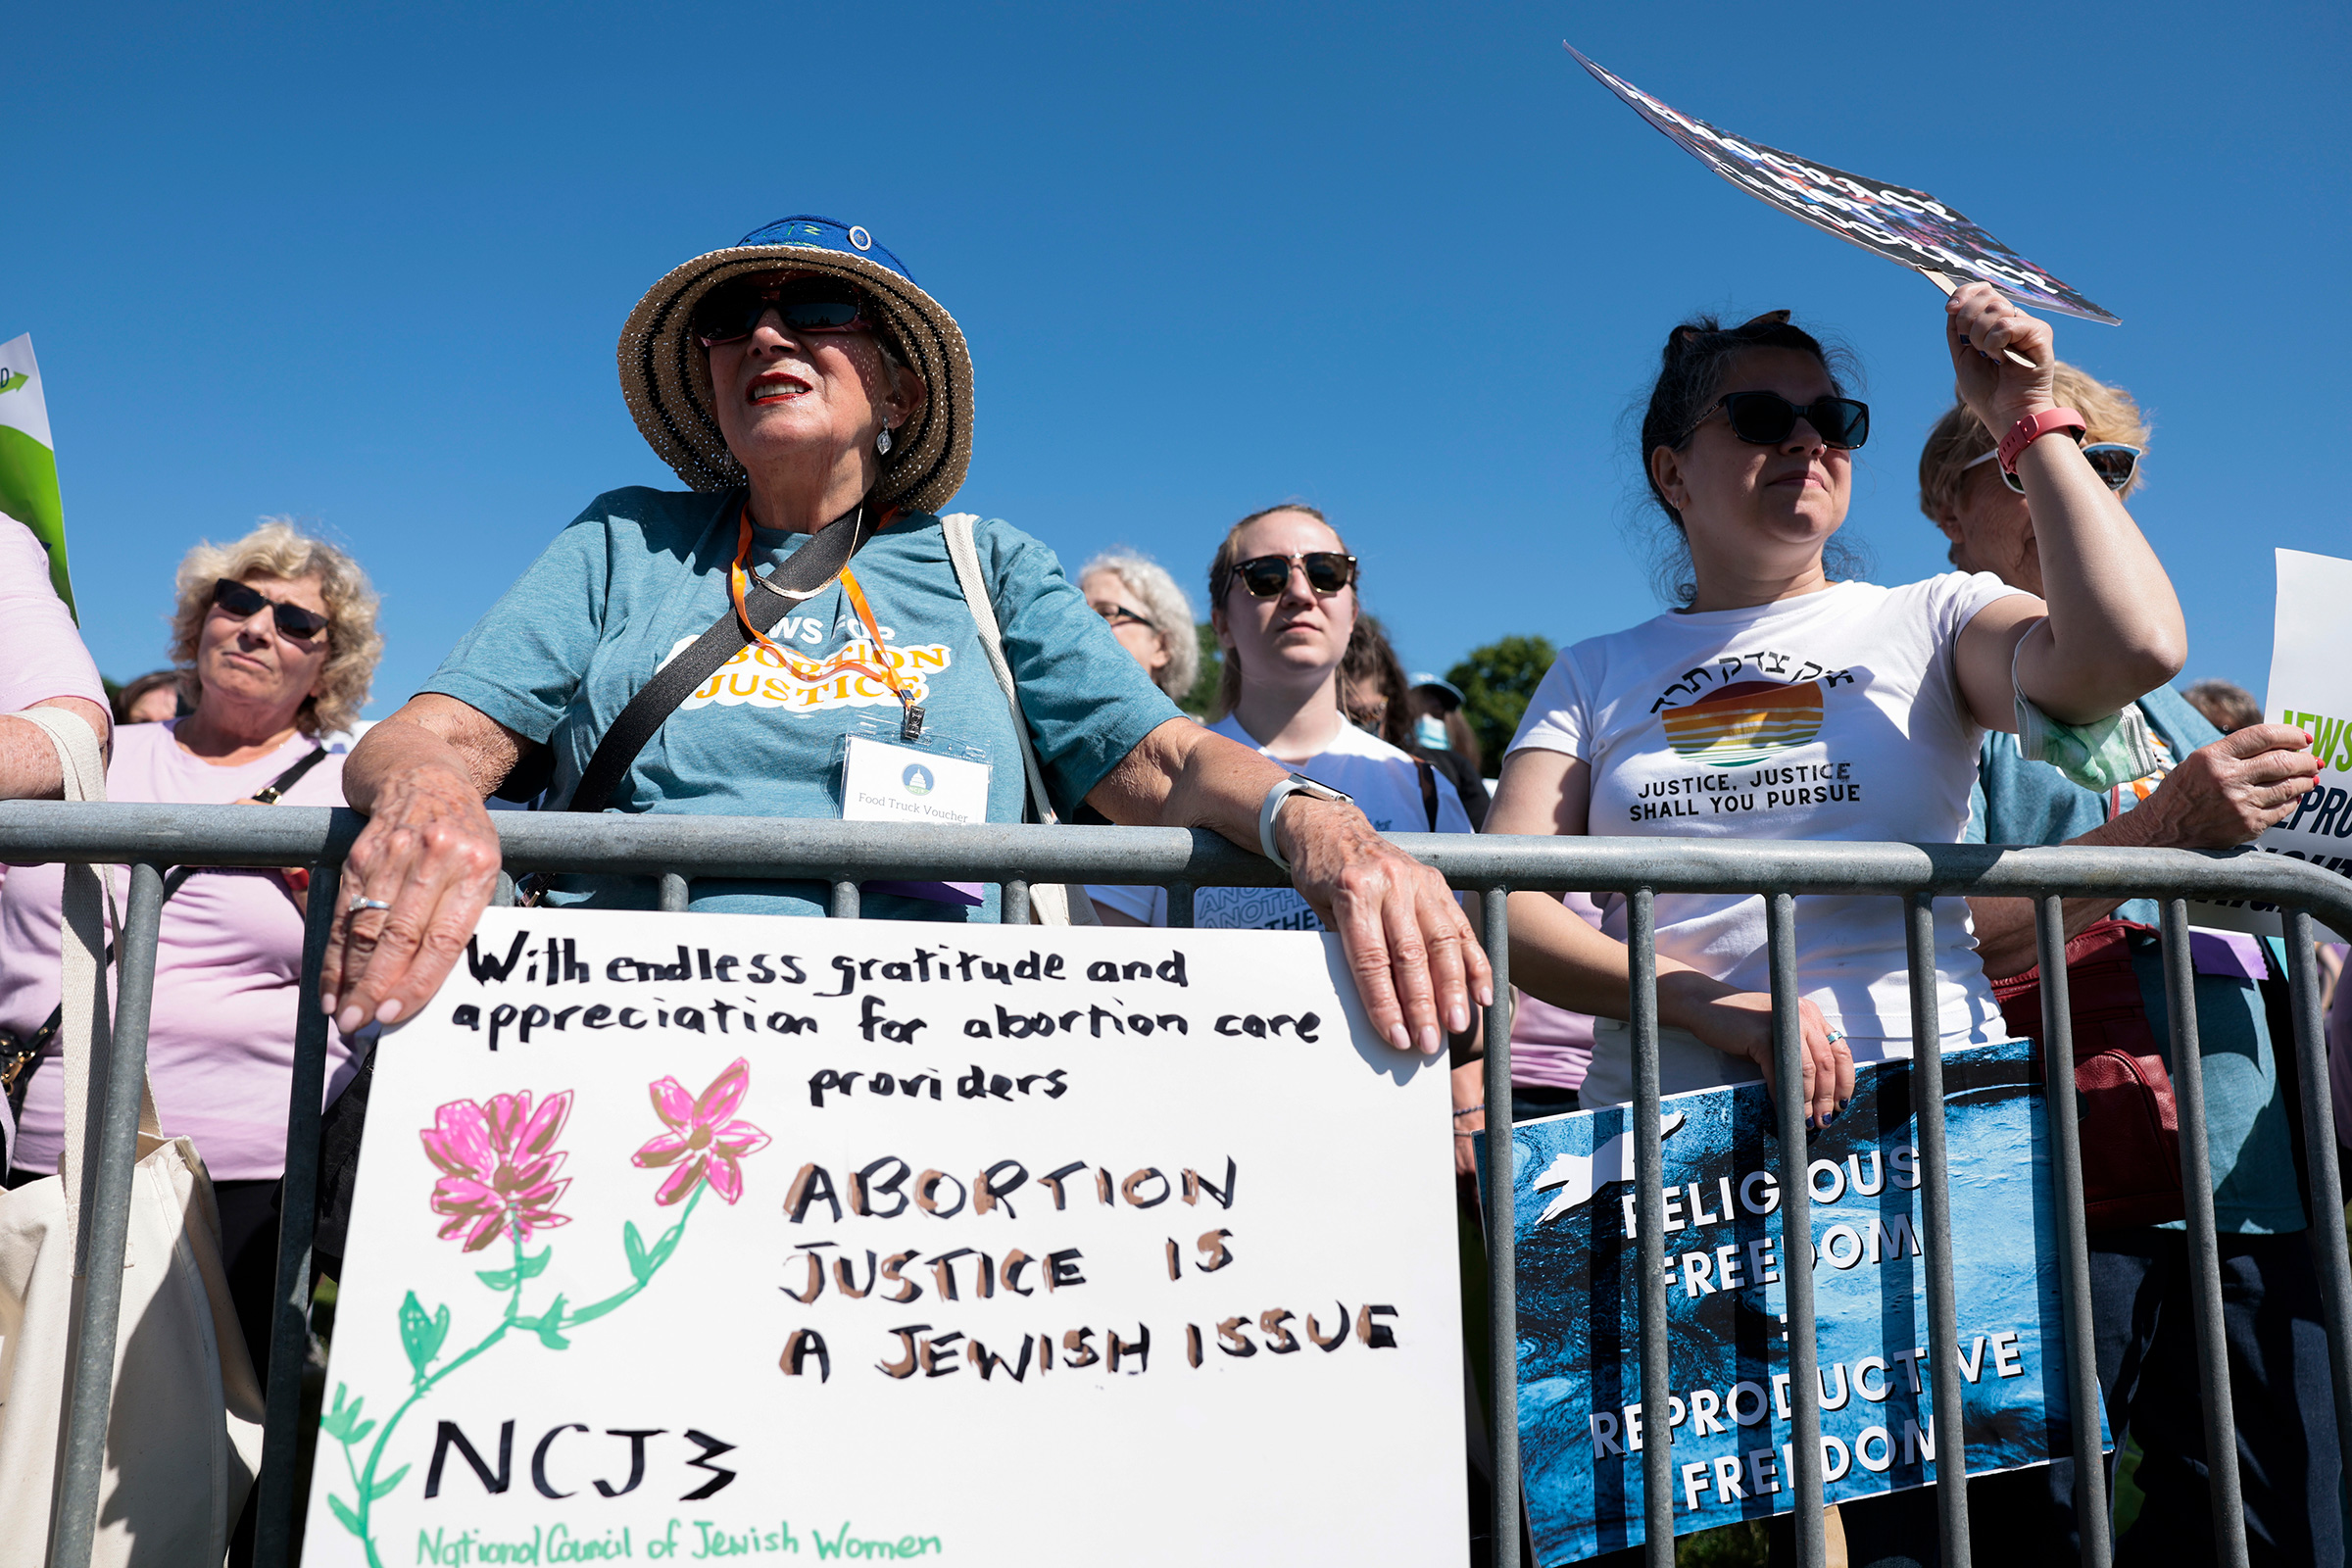 Protesters attend the "Jewish Rally for Abortion Justice" at Union Square in Washington, D.C., on May 17, 2022.